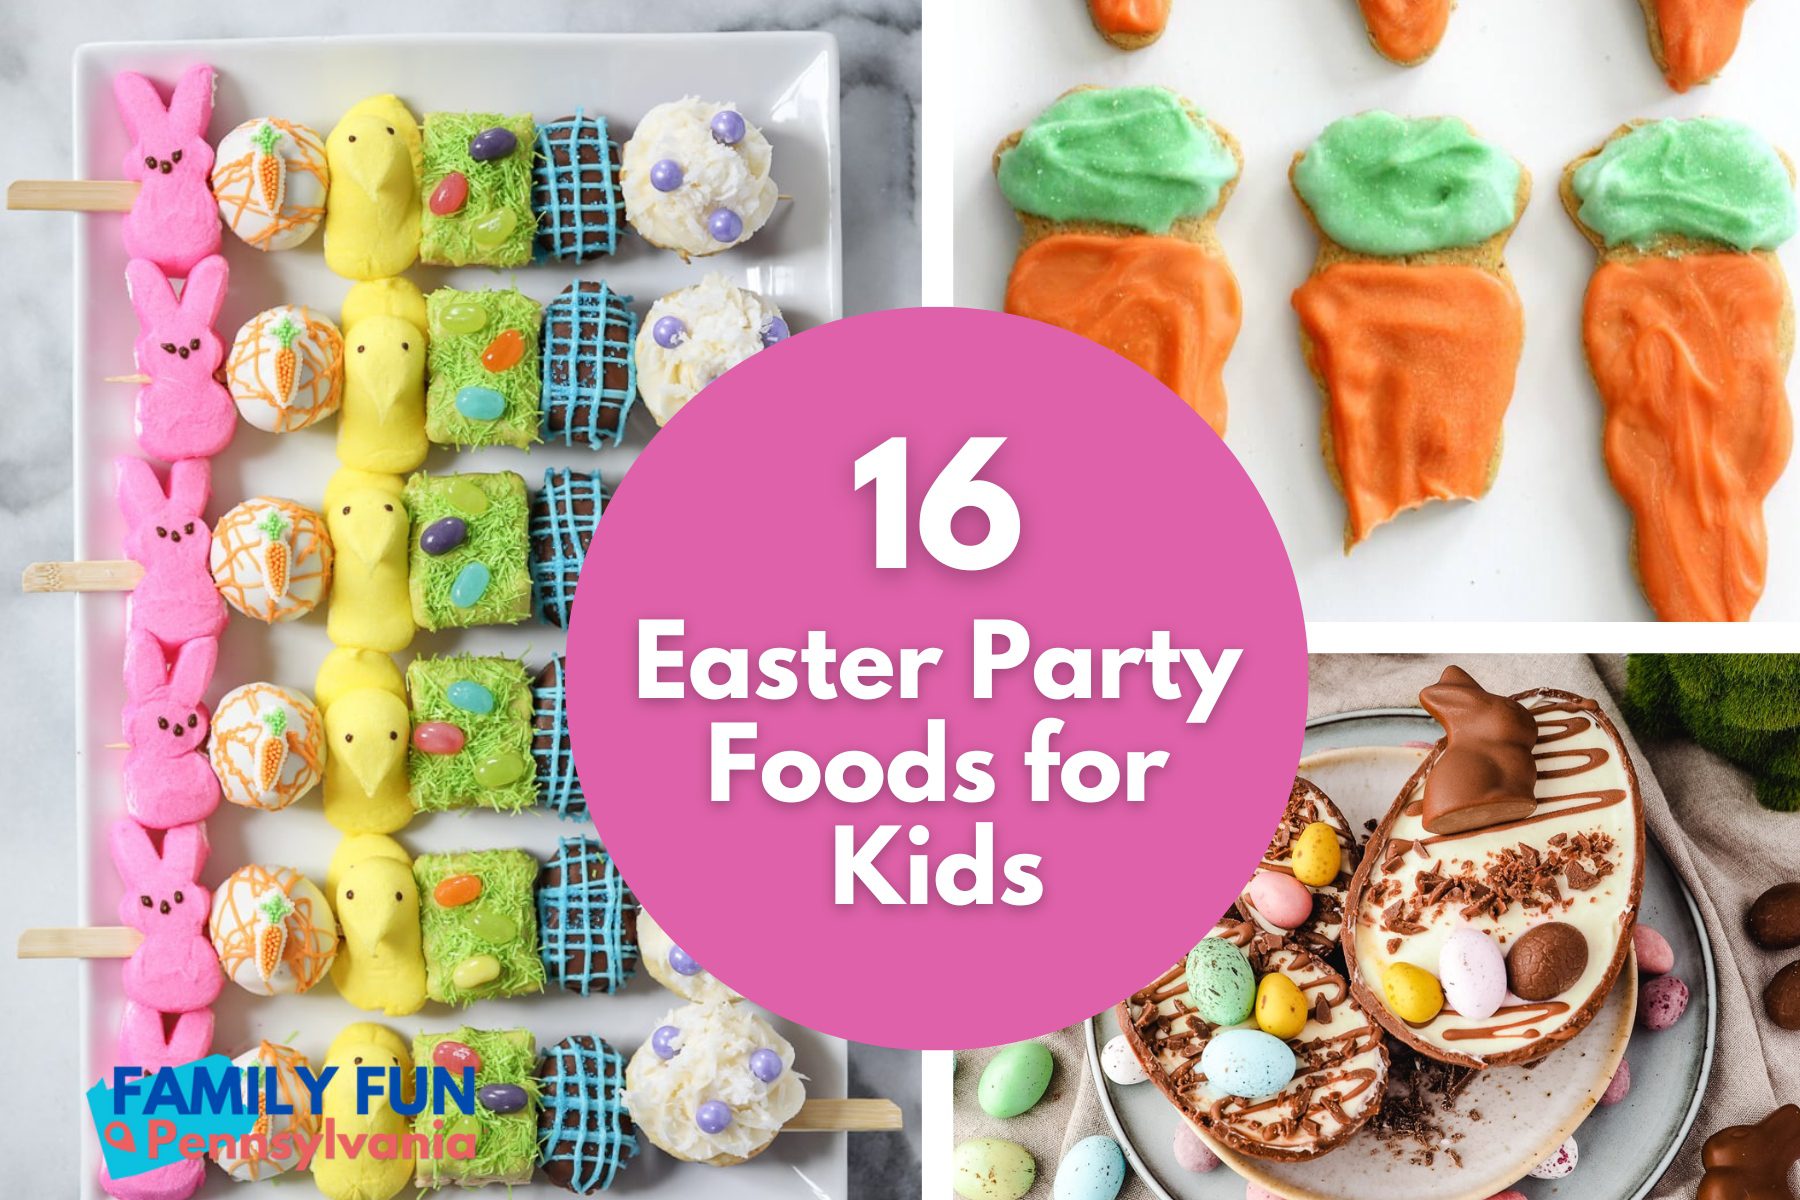 16 Easter Party Foods for Kids